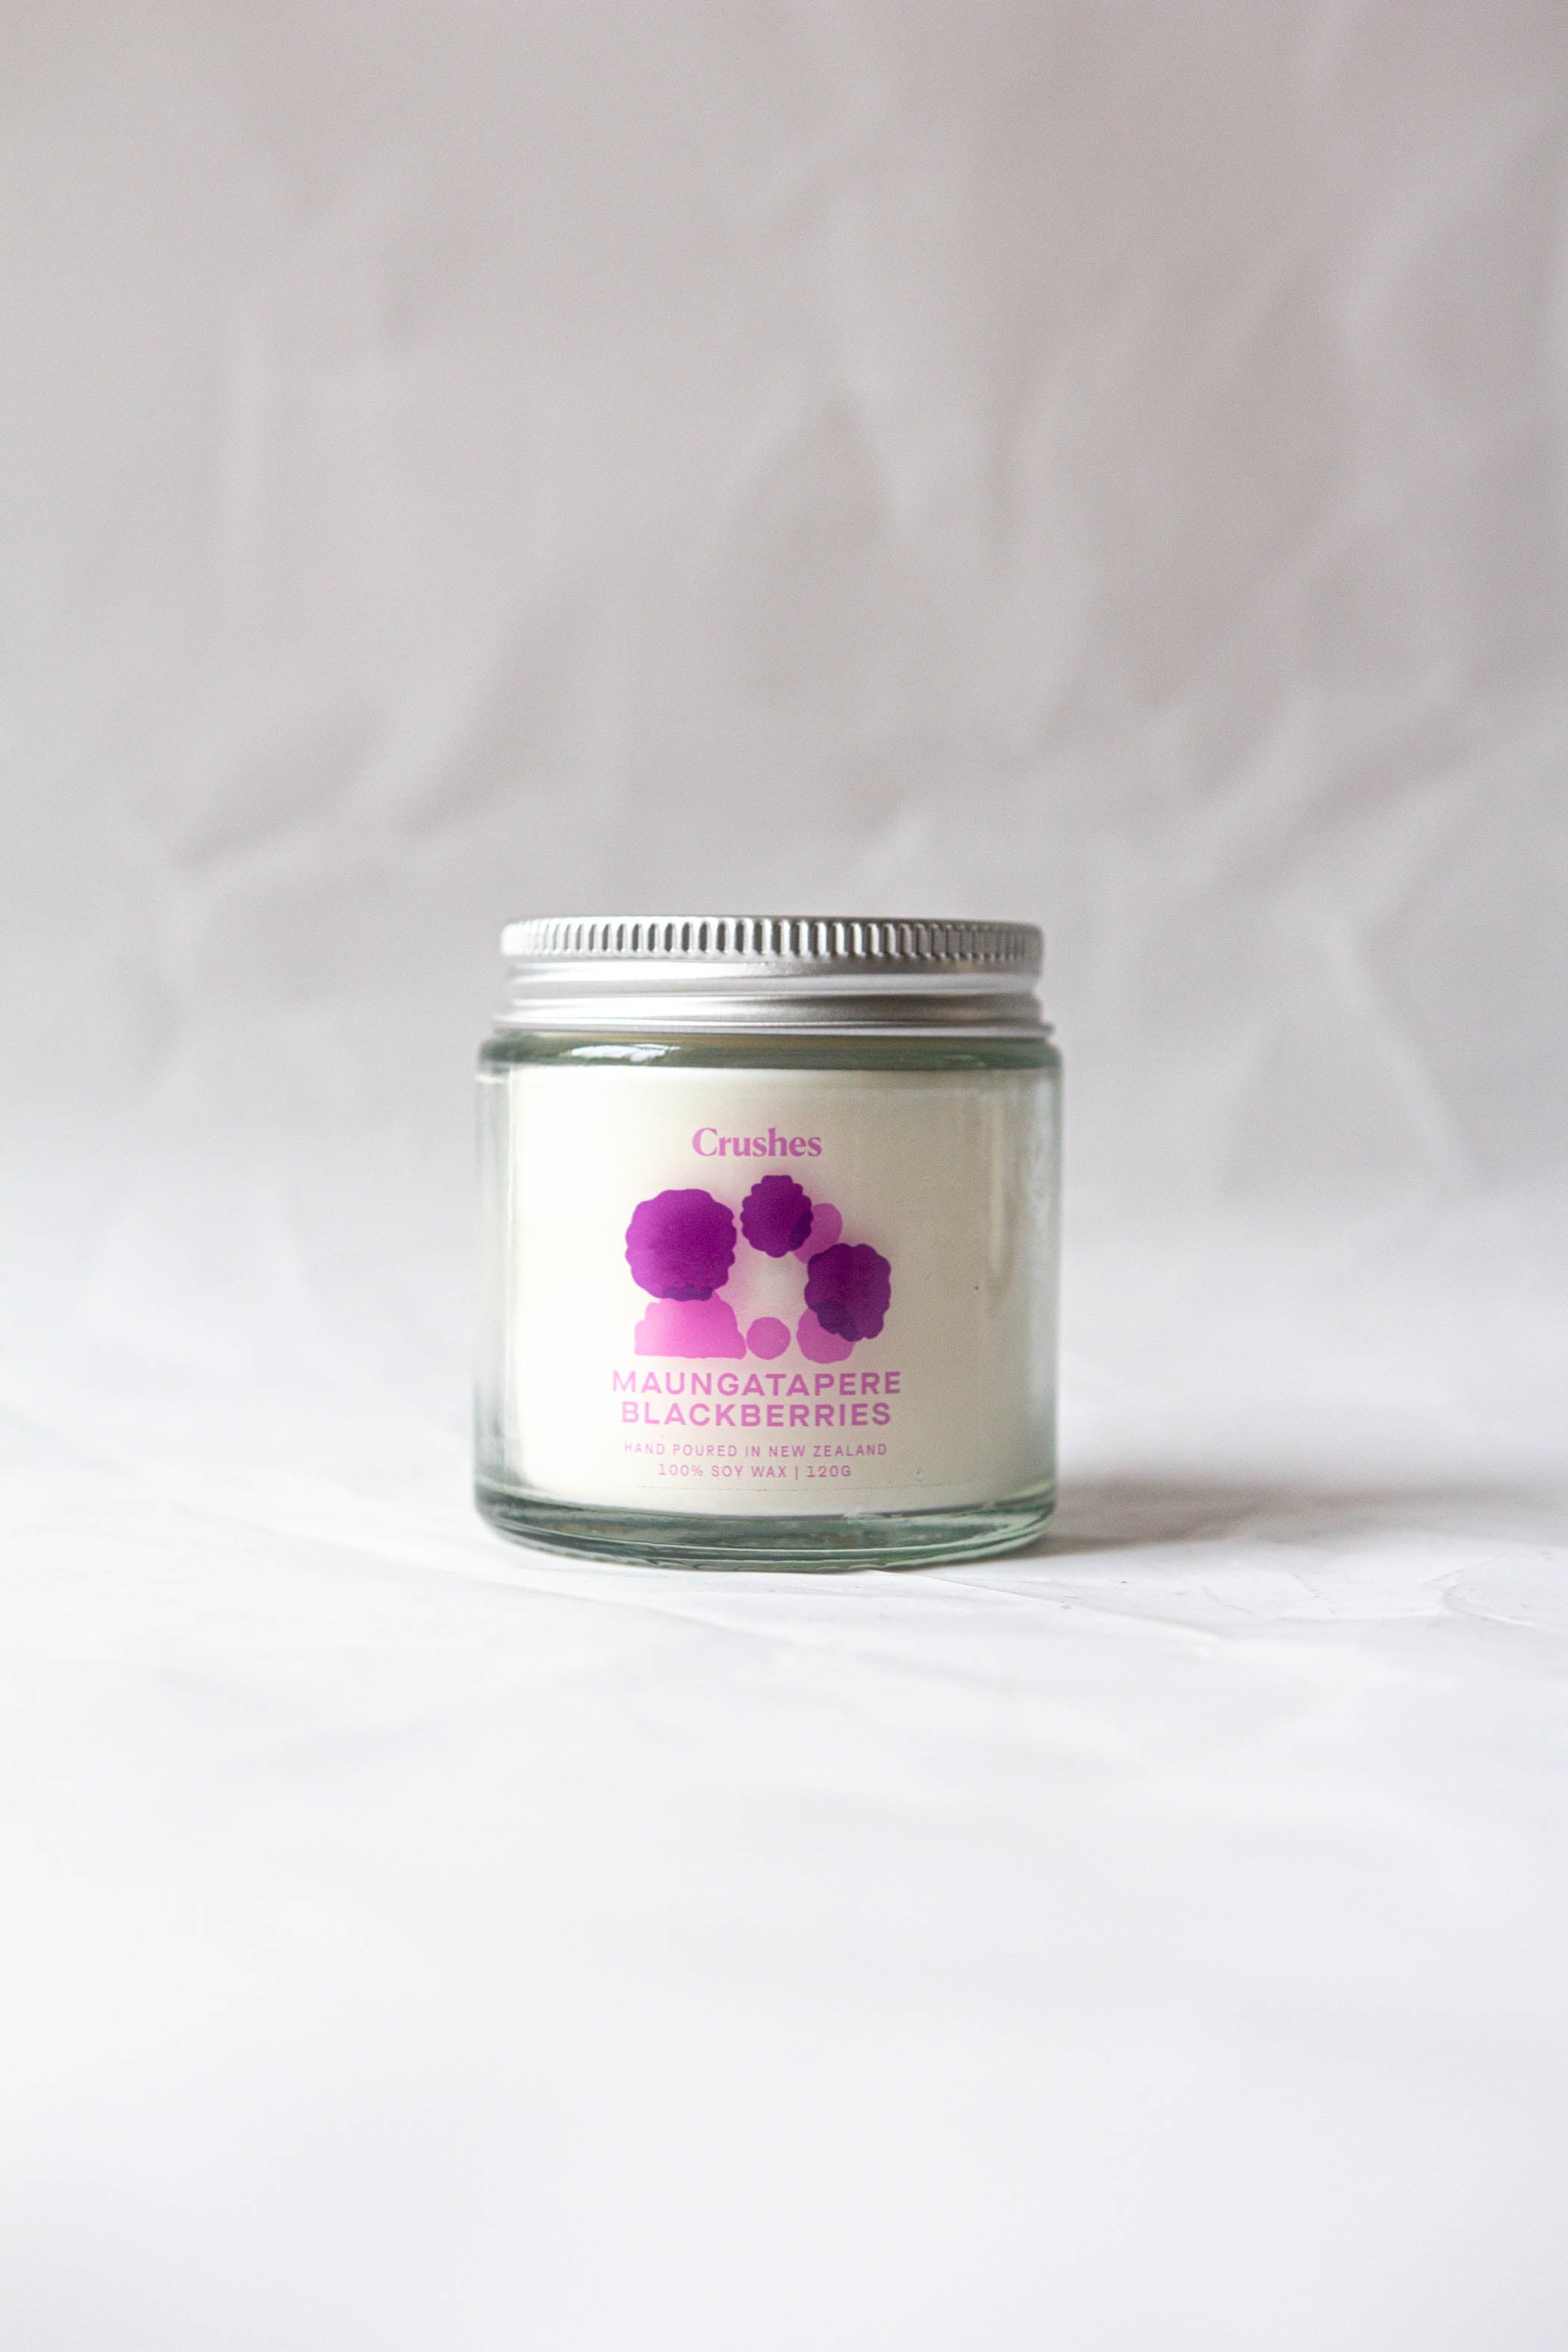 Maungatapere Blackberries Scented Soy Candle